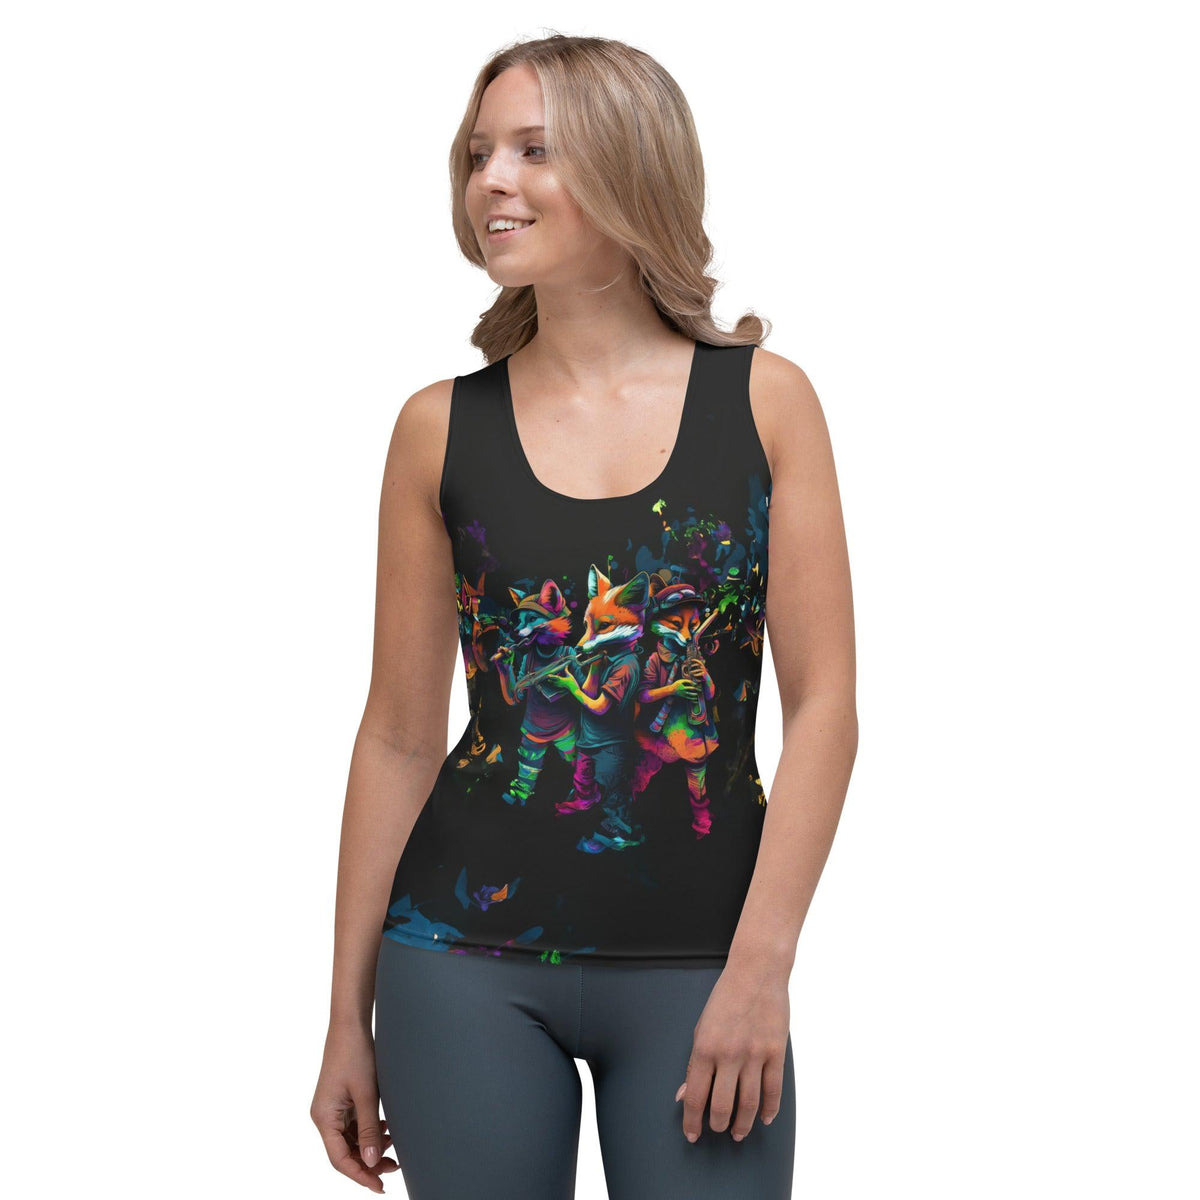 Street Melodies All-Over Print Women's Tank Top - Beyond T-shirts